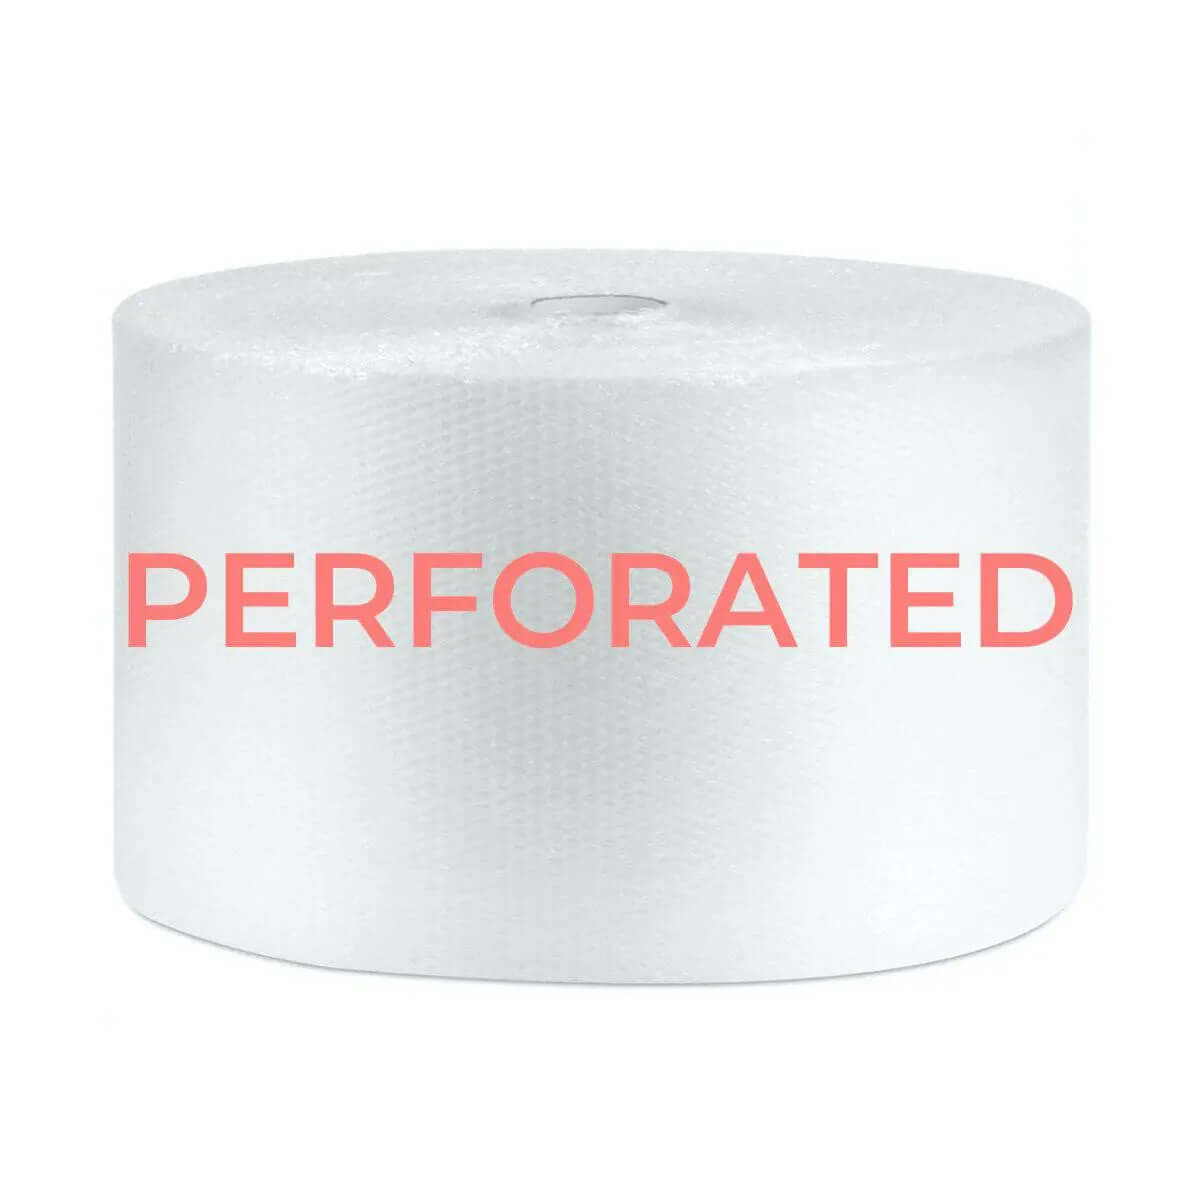 Perforated Bubble Wrap Roll - 250mm x 100m   Bubble Wrap Packstore Australia Packstore